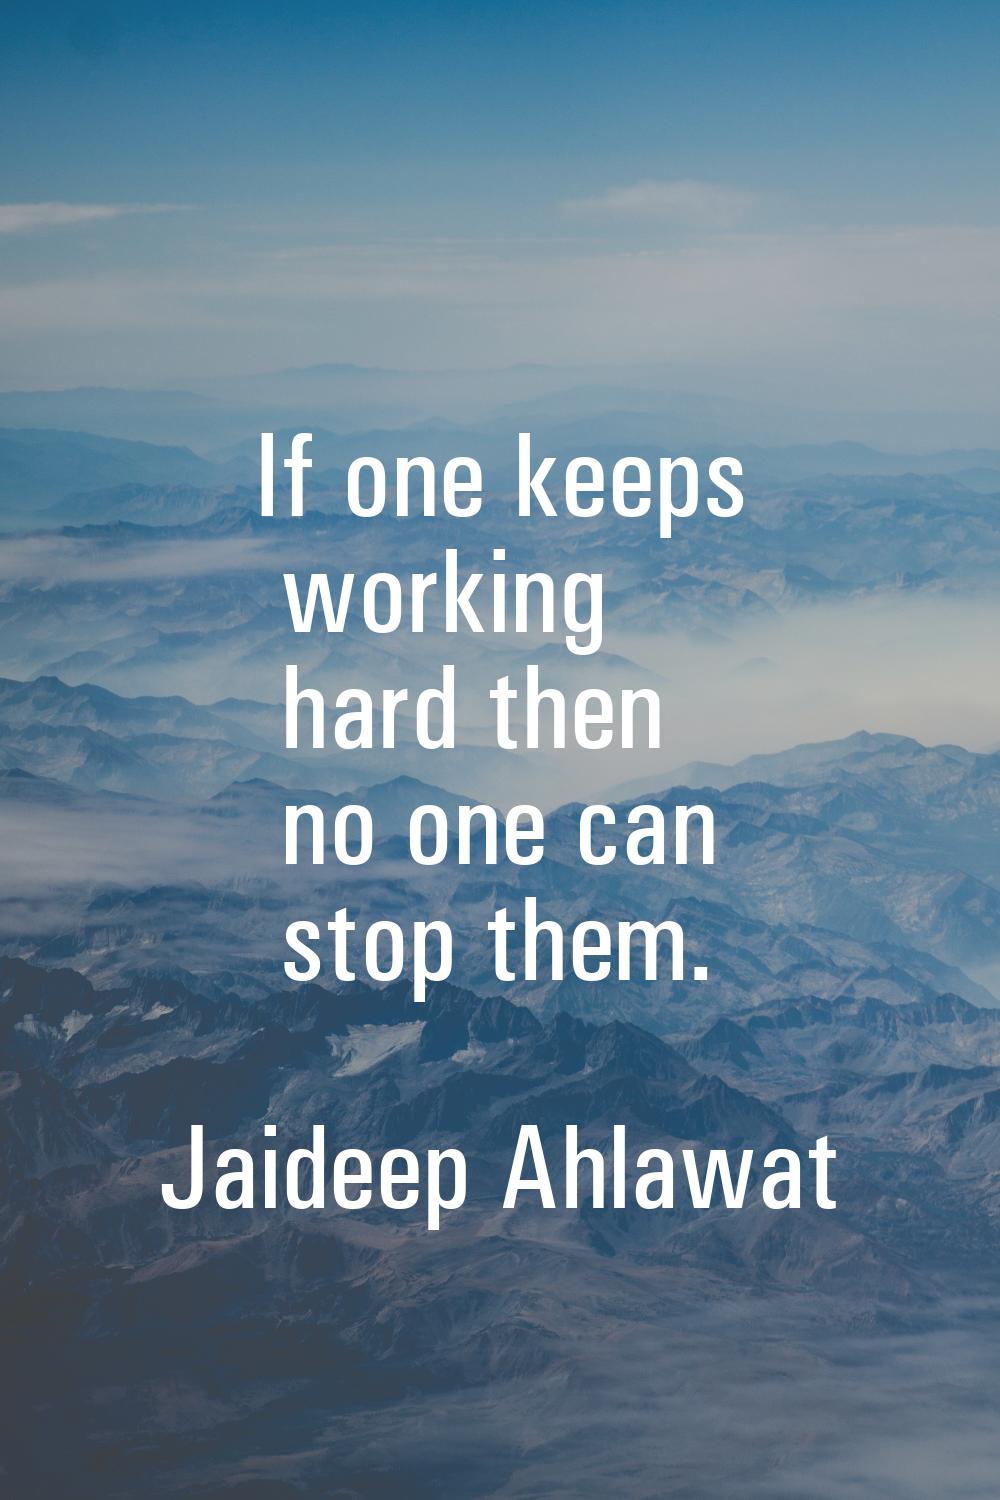 If one keeps working hard then no one can stop them.